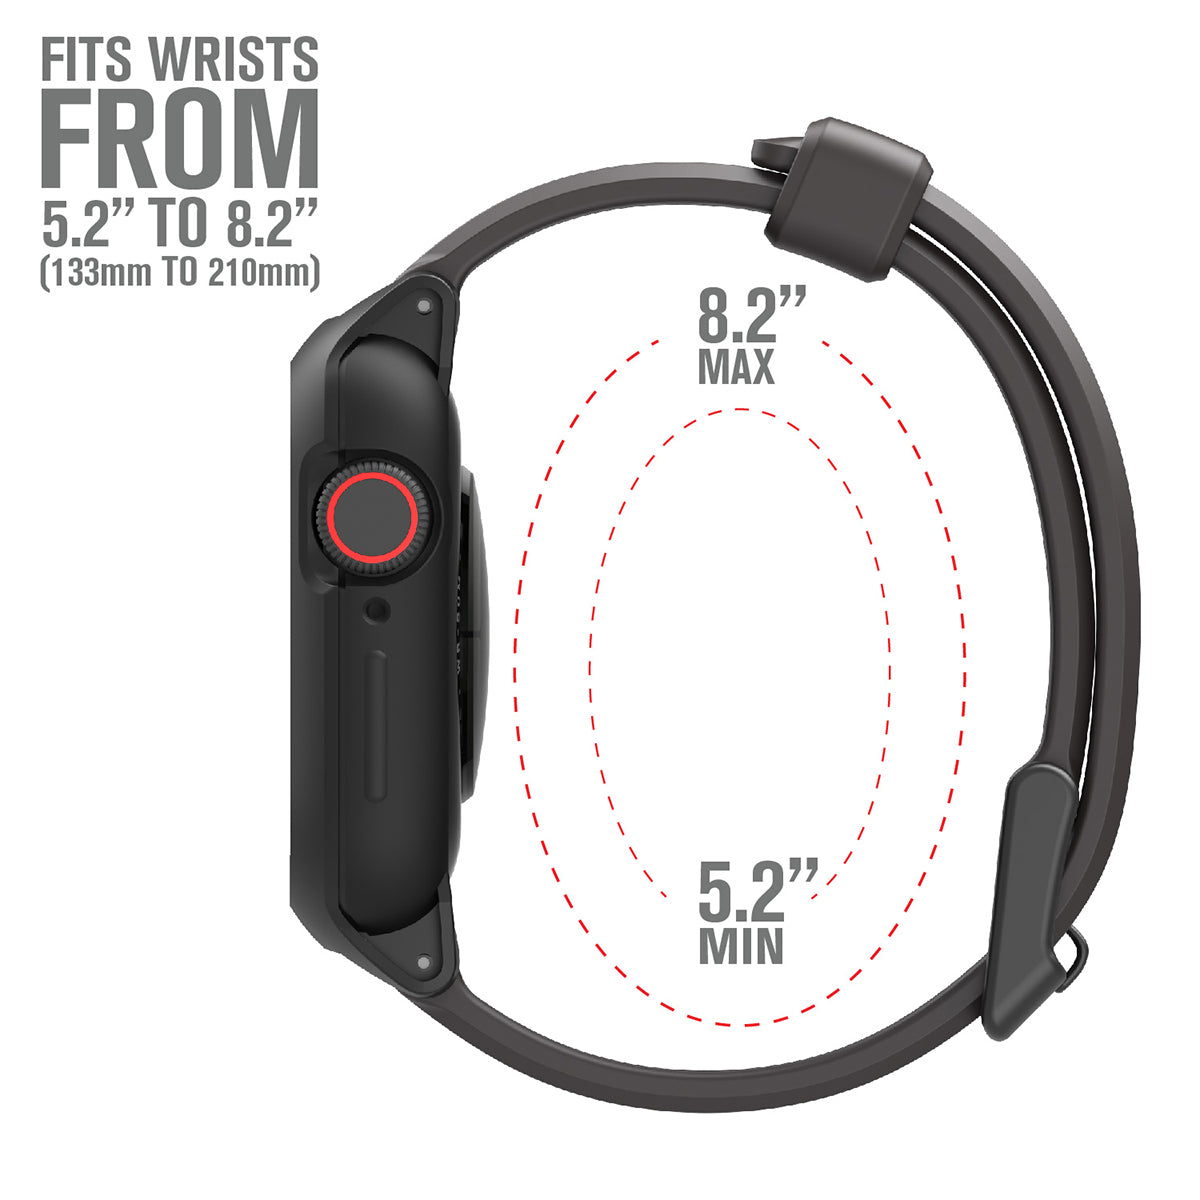 catalyst apple watch series 9 8 7 6 5 4 SE Gen 2 1 38 40 41mm sport band buckle edition side view of the case with the minimum and maximum sizes of the band space gray text reads fits wrists from 5.2" to 8.2"(133mm to 210mm)